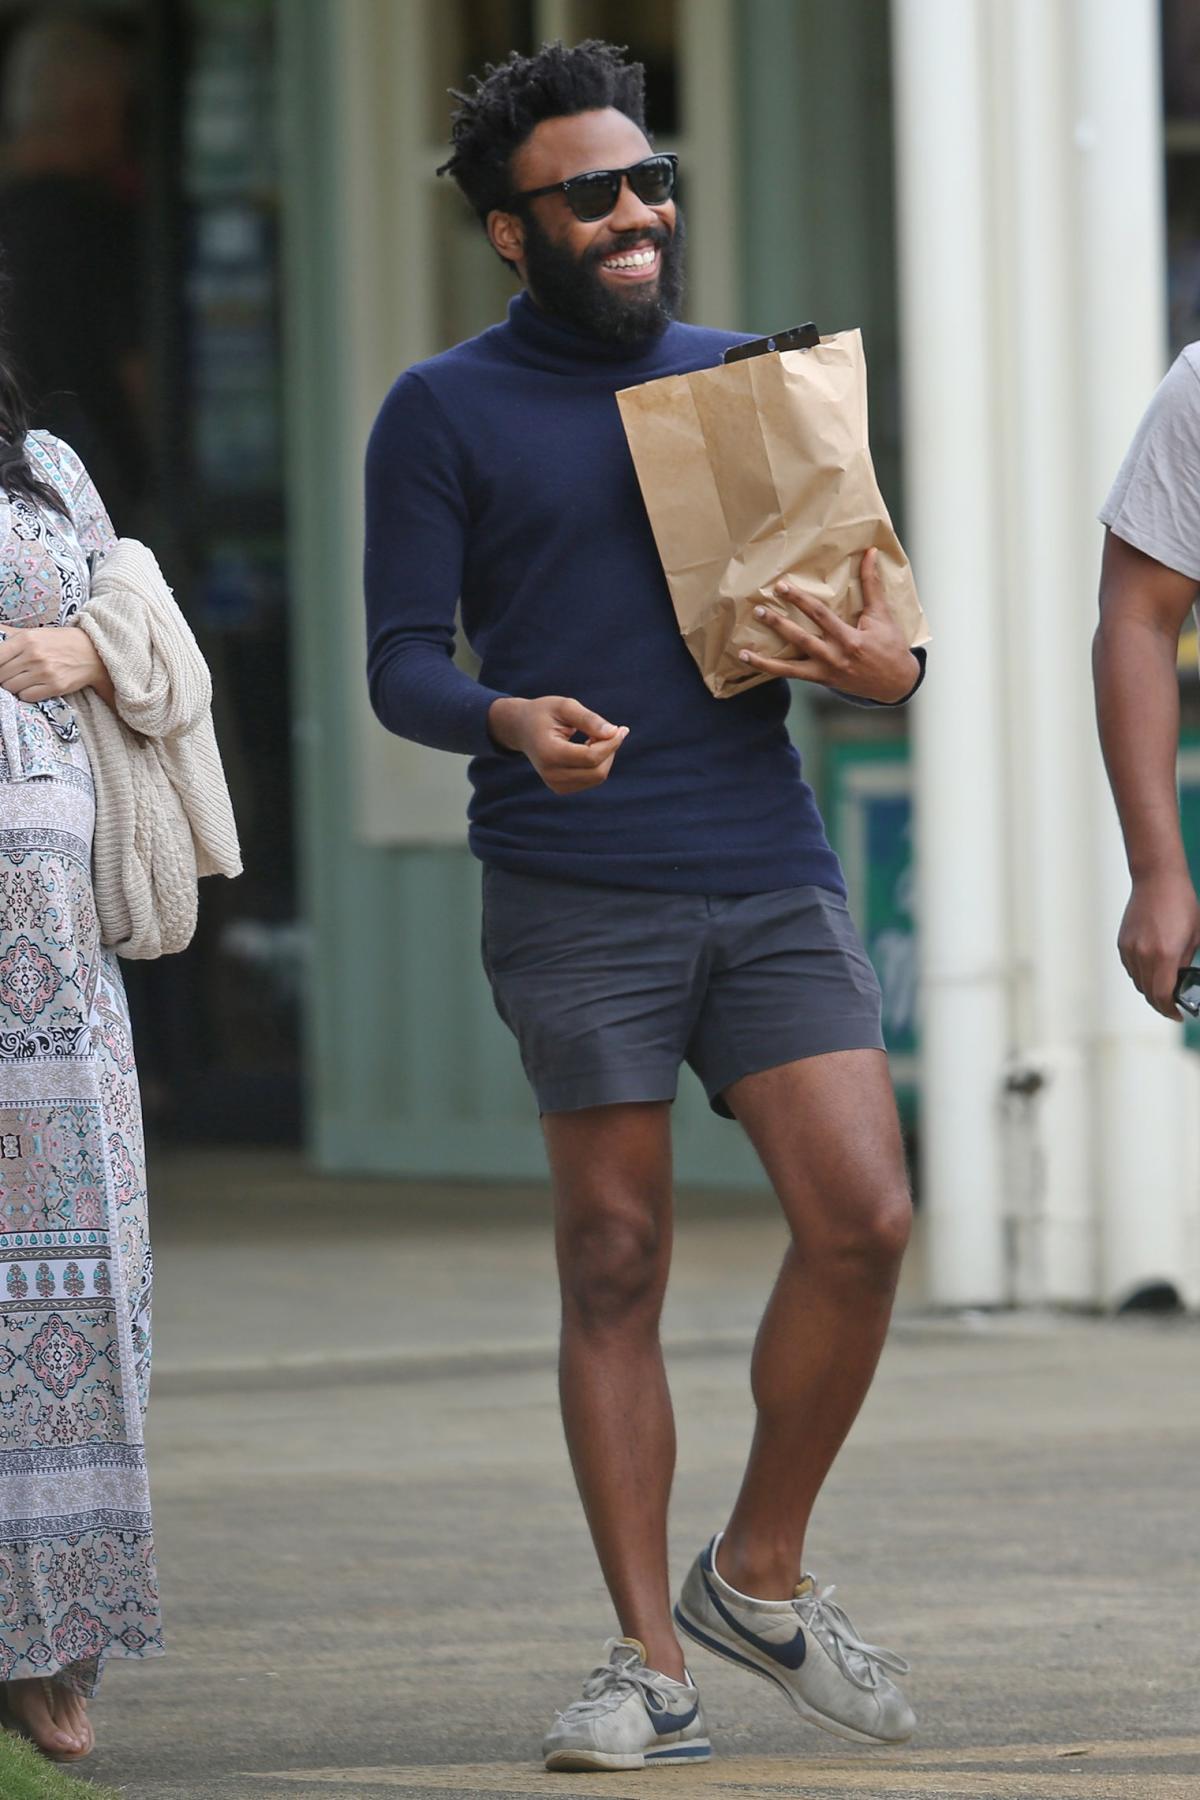 10 Highly Ways to Wear Shorts This Summer - Yahoo Sports